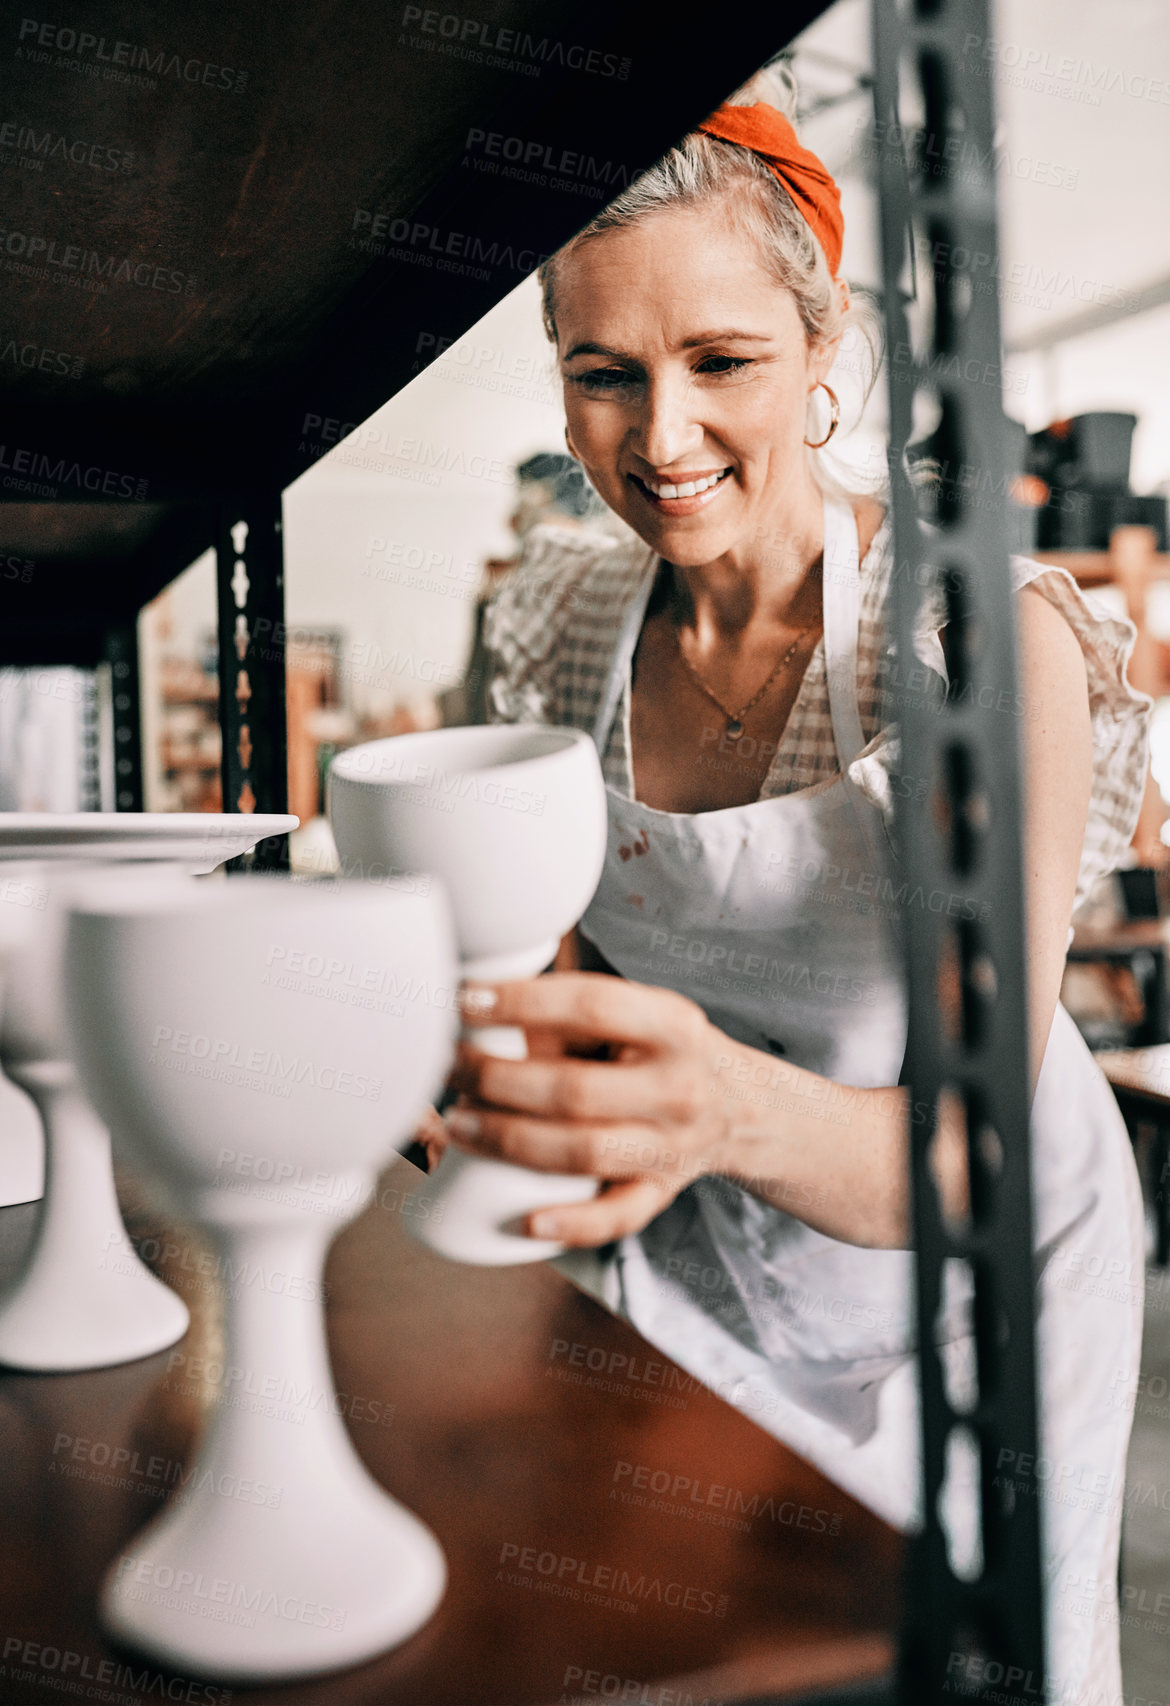 Buy stock photo Cropped shot of an attractive mature woman standing and organising her pottery on a shelf in her workshop